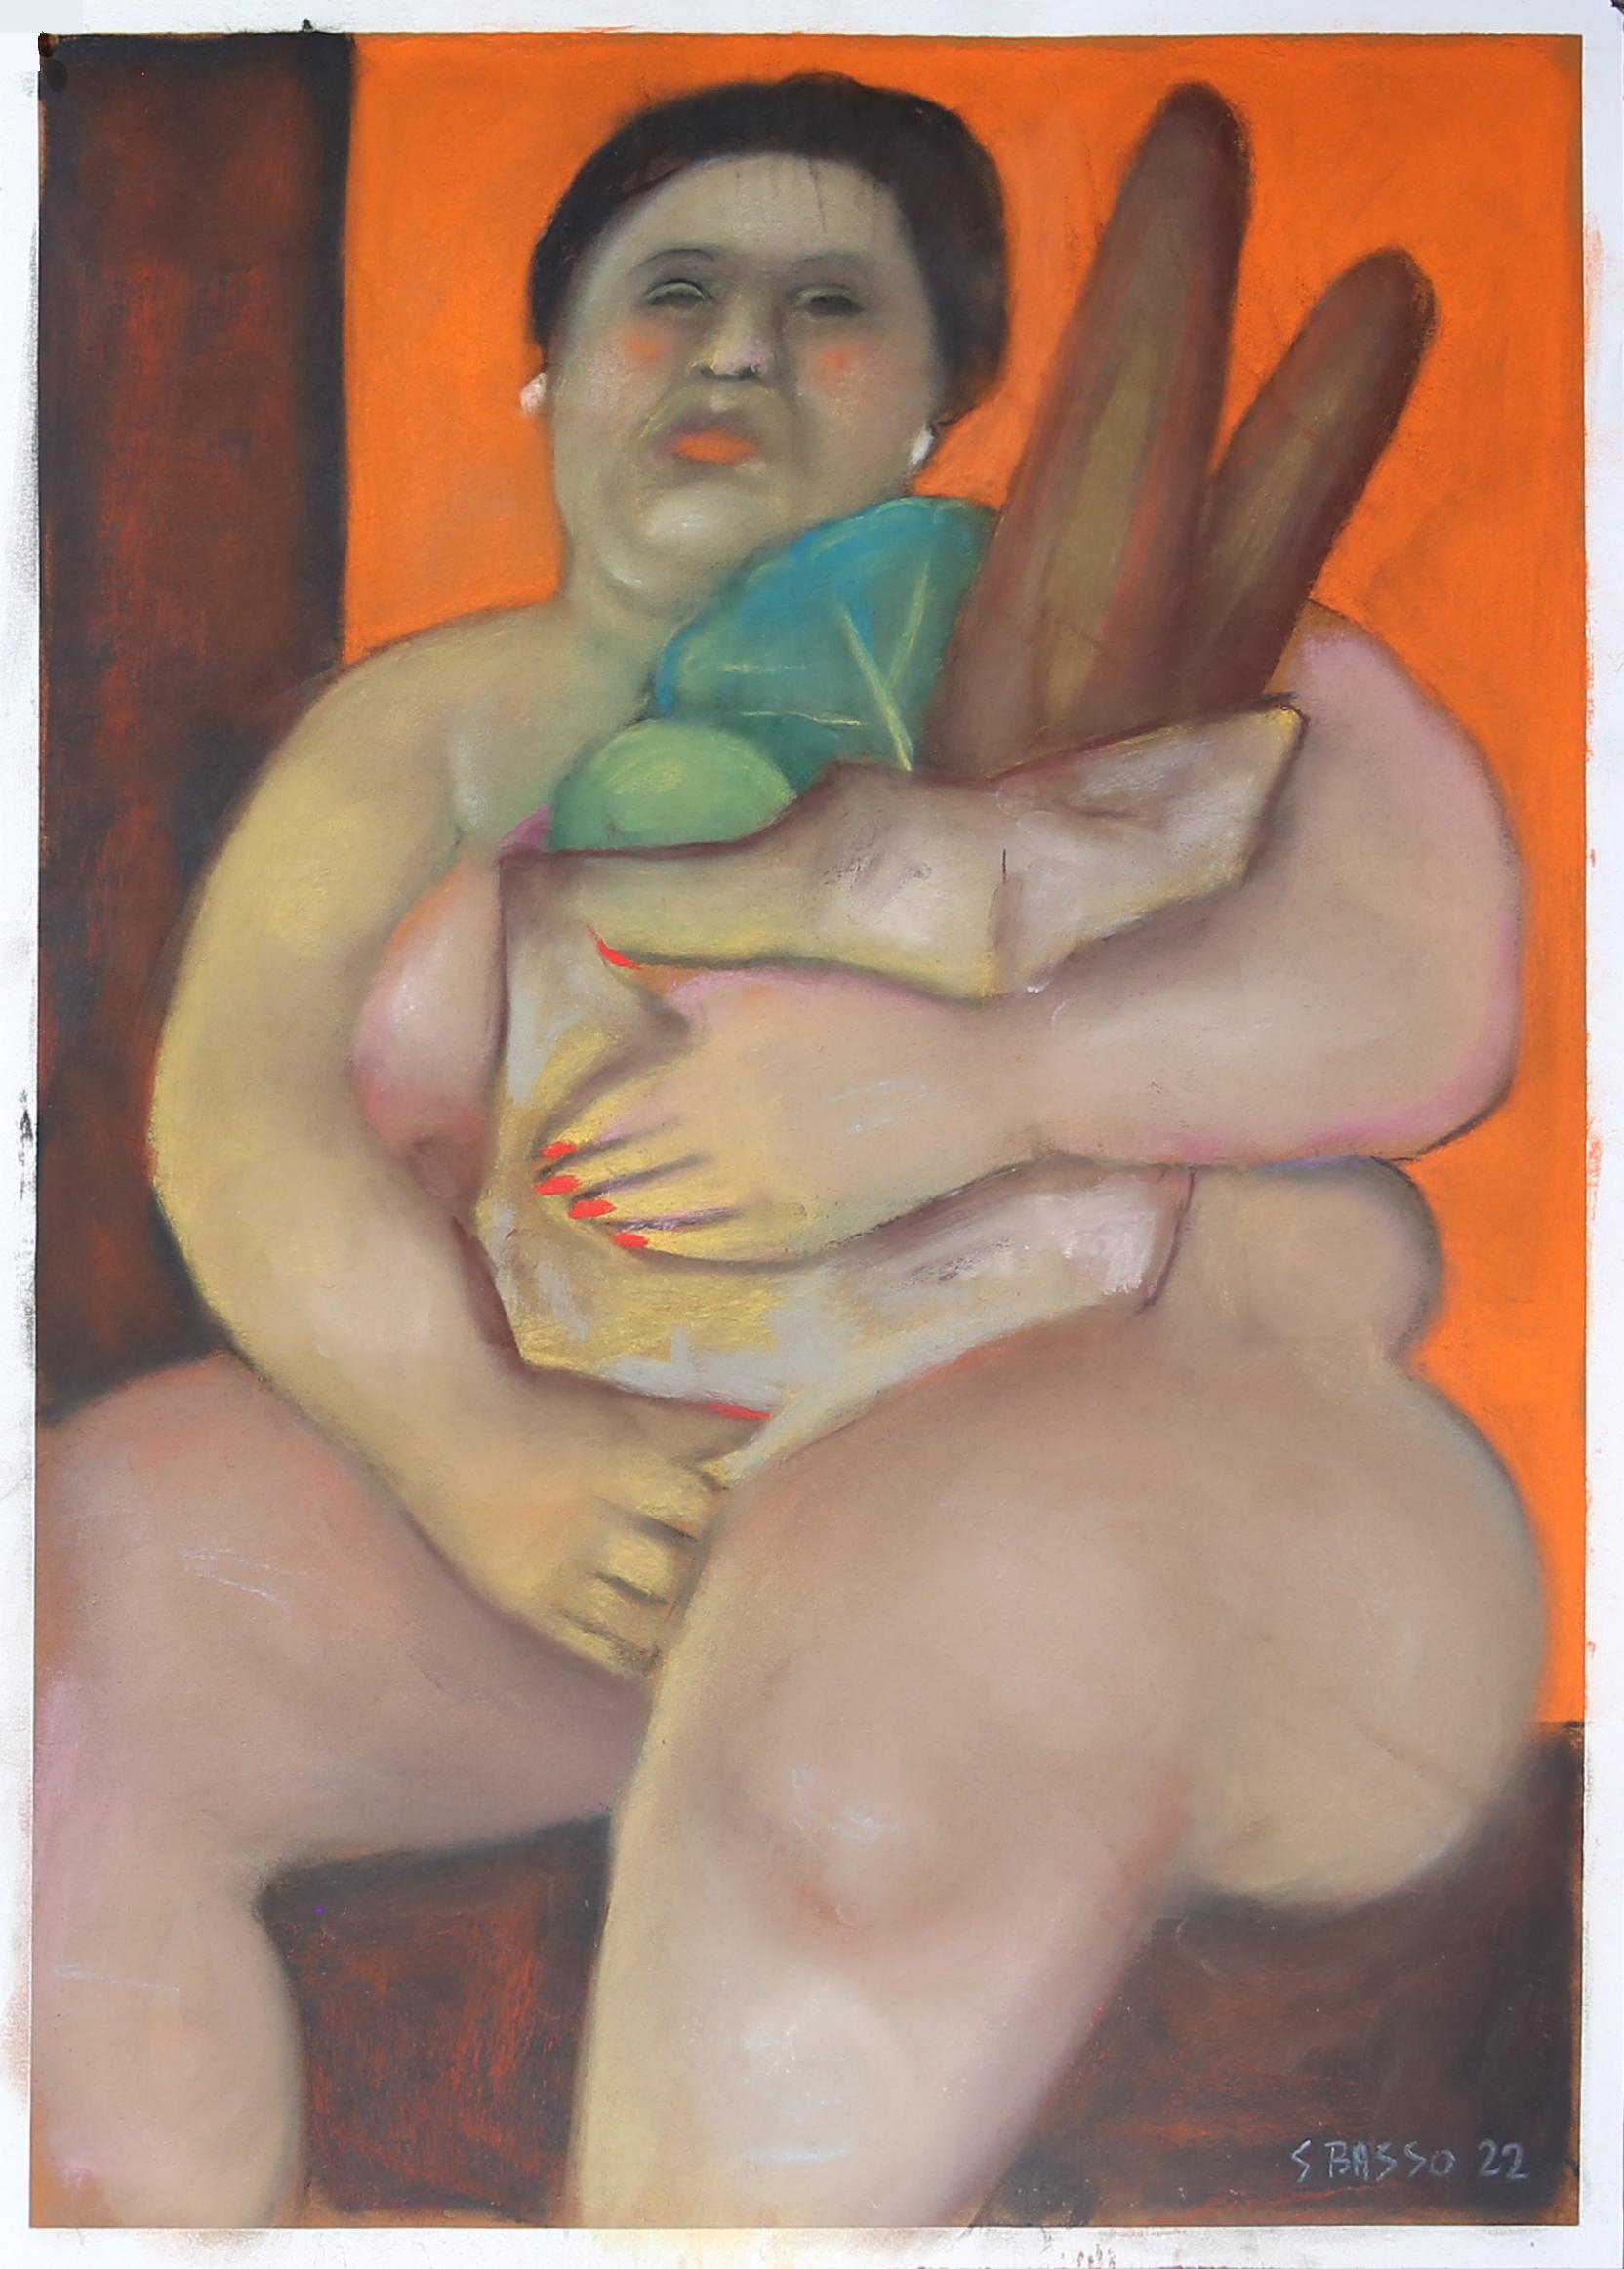 Bread and Cabbage Nude food and seated nude female figure warm earth tones